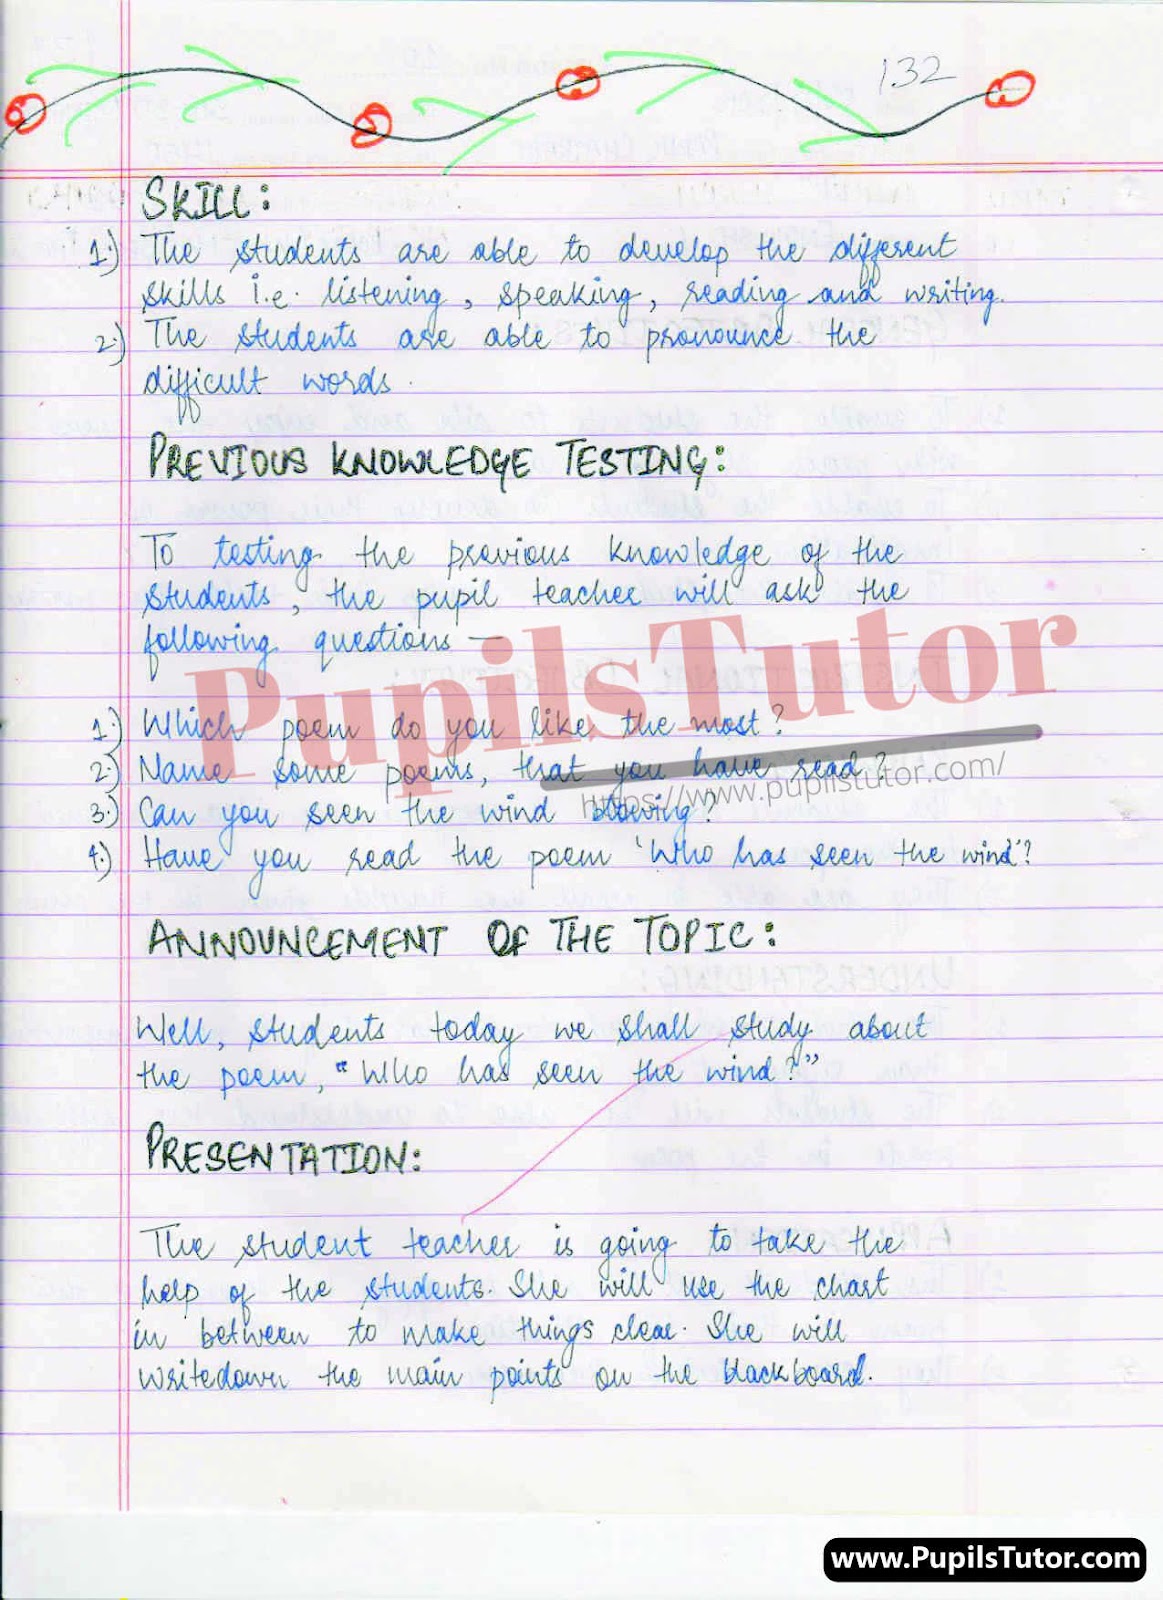 School Teaching And Practice Skill Who Has Seen The Wind (Poem) Lesson Plan For B.Ed And Deled Free Download PDF And PPT (Power Point Presentation And Slides) – (Page And Image Number 2) – PupilsTutor